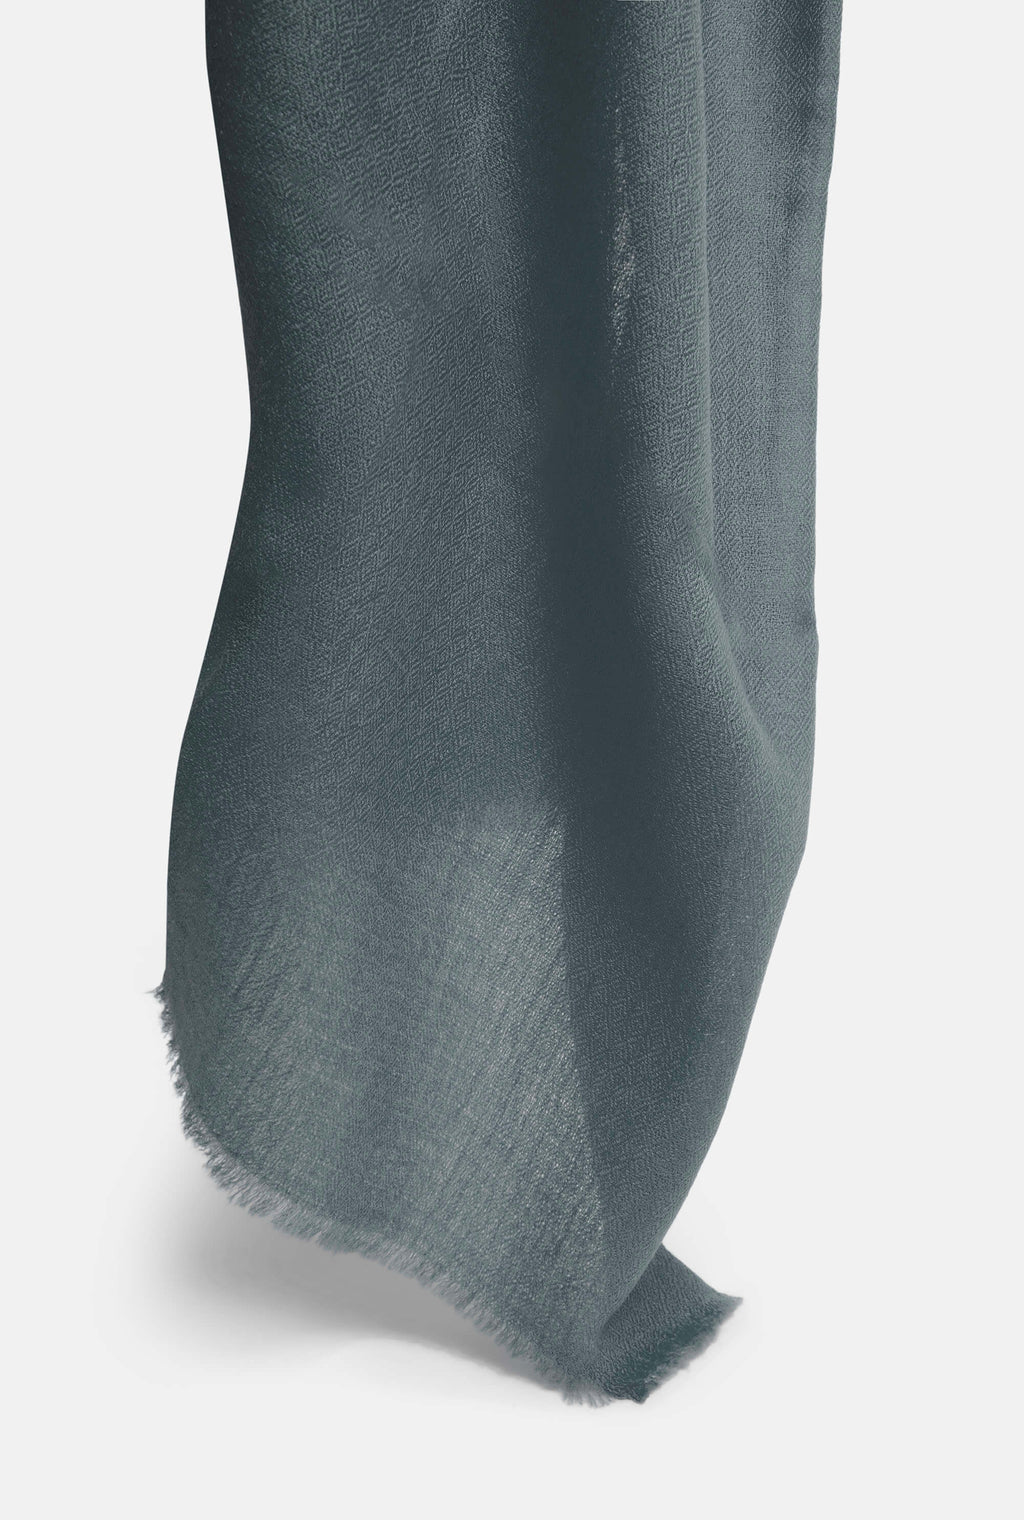 Cashmere Scarf Charcoal